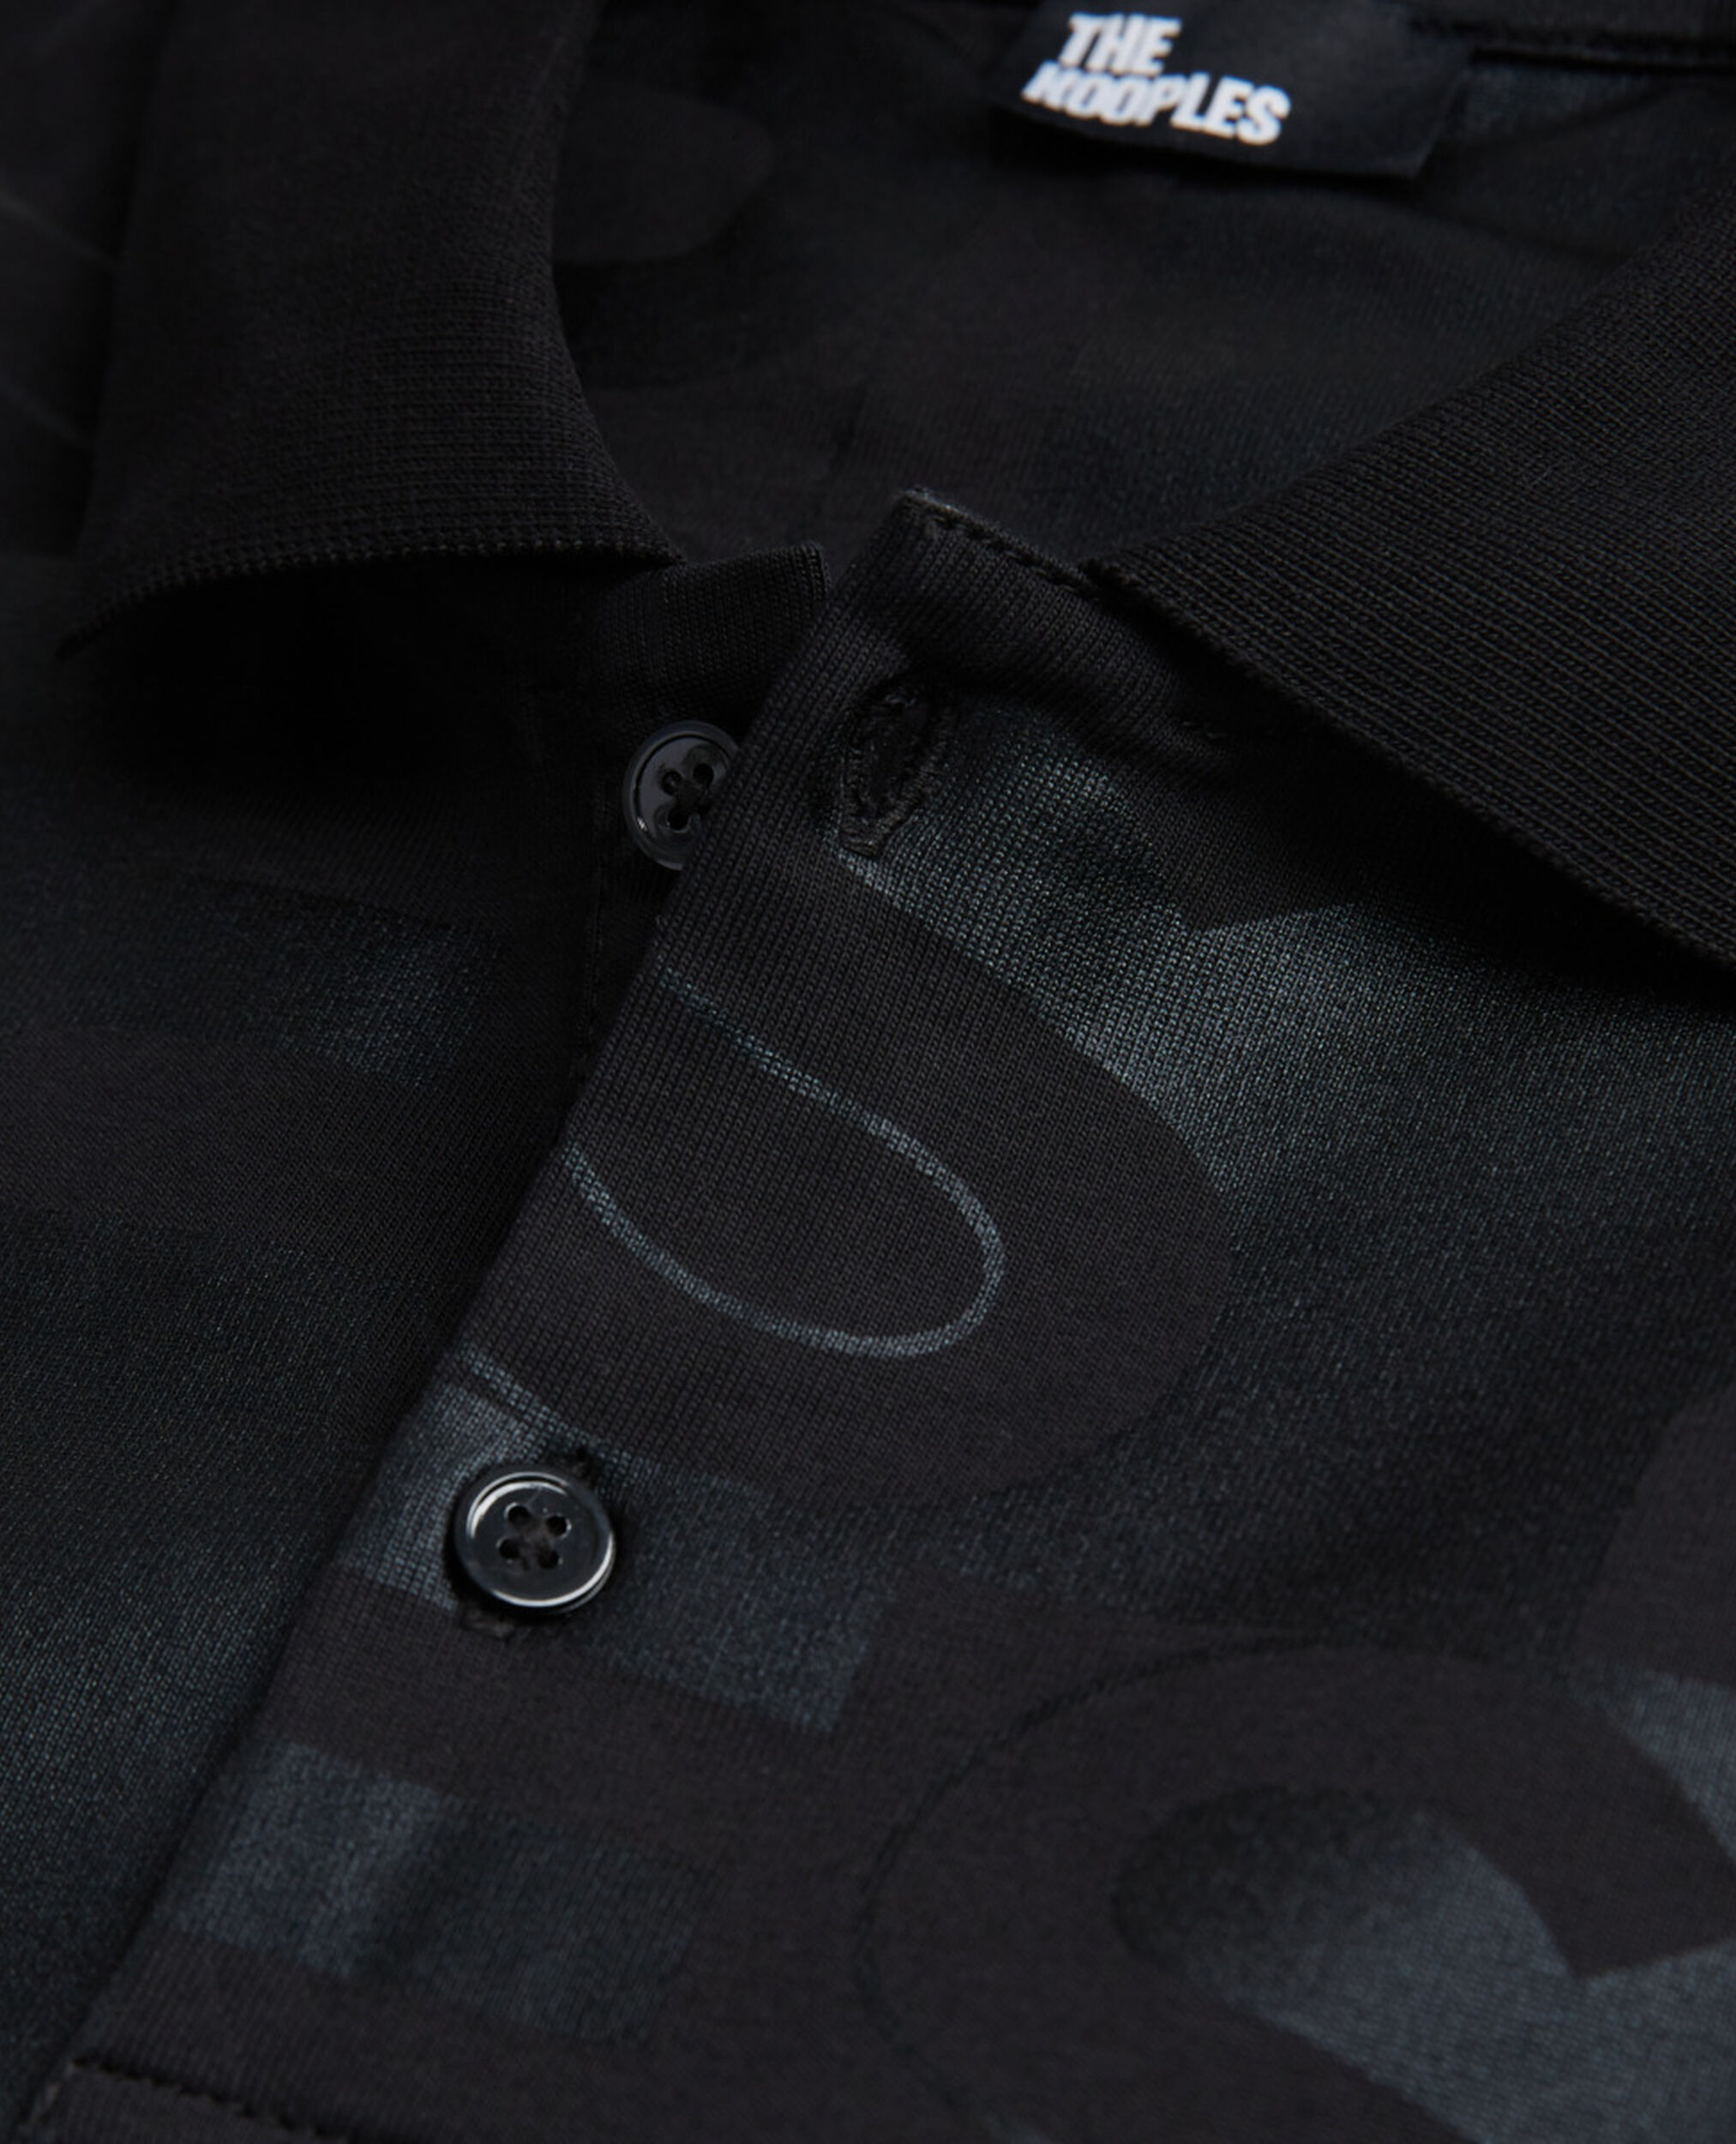 Camisa polo logotipo The Kooples, BLACK, hi-res image number null